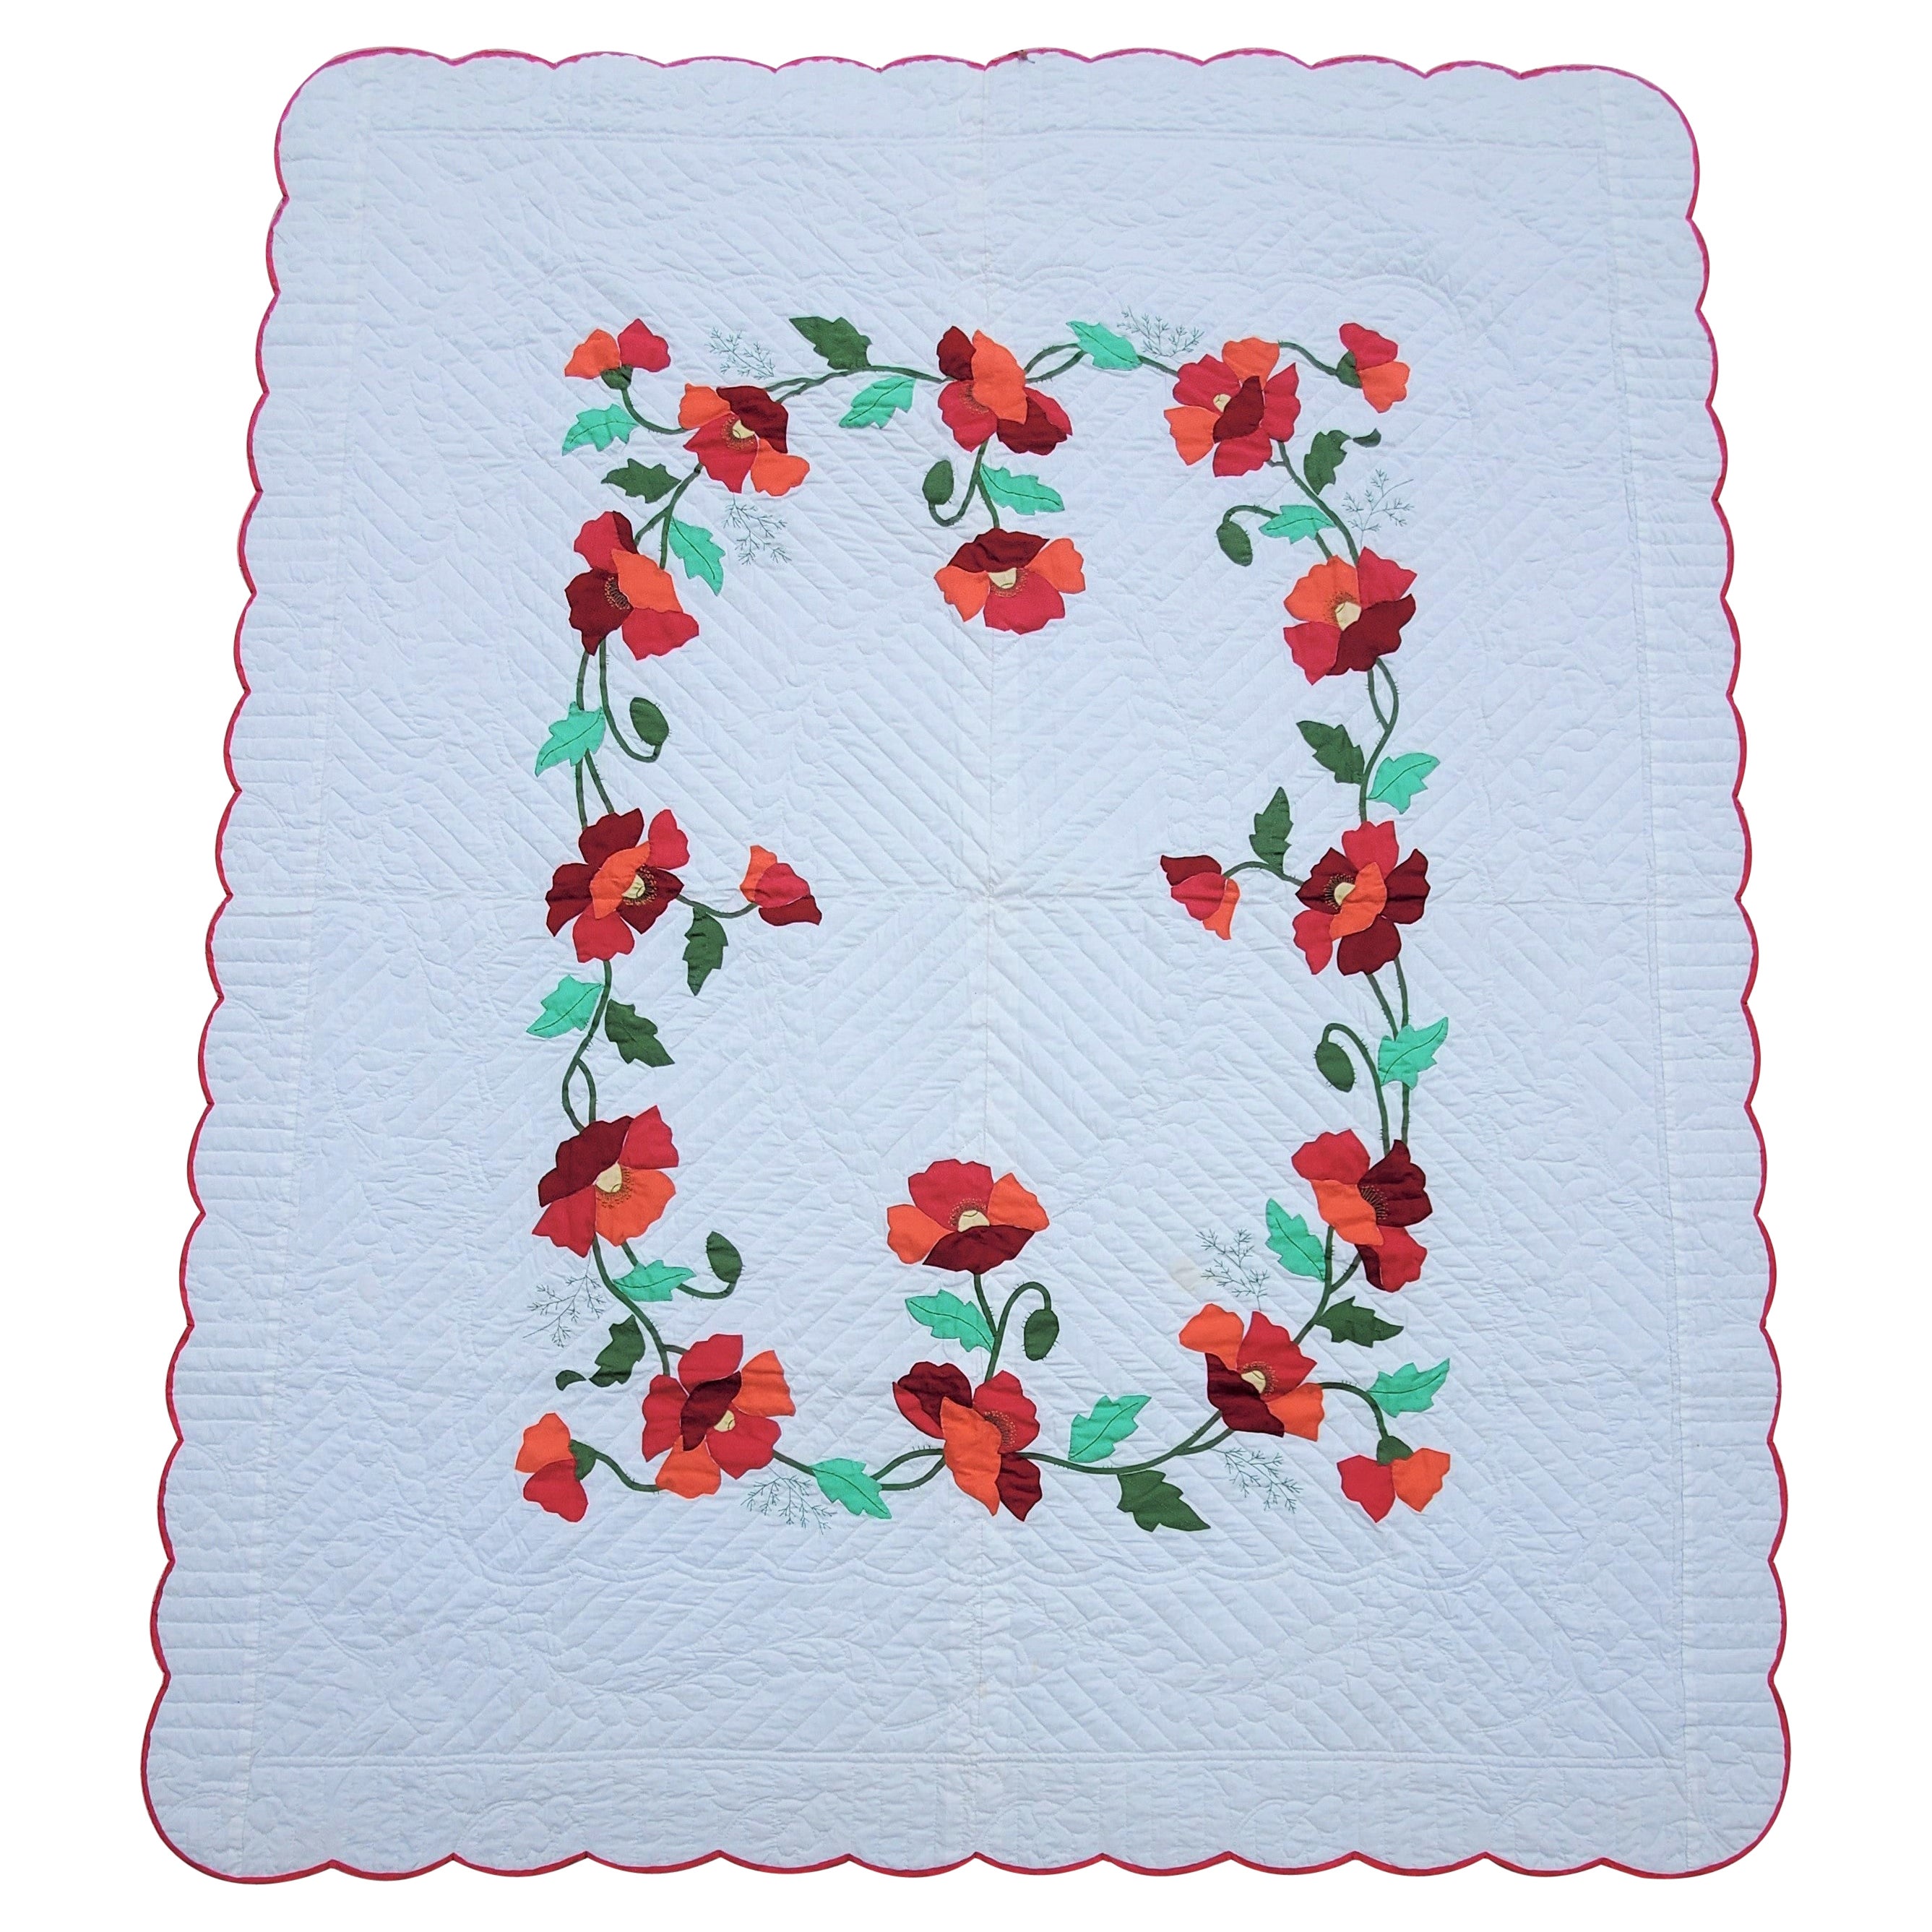 Applique Rose Quilt Signed and Dated 1989